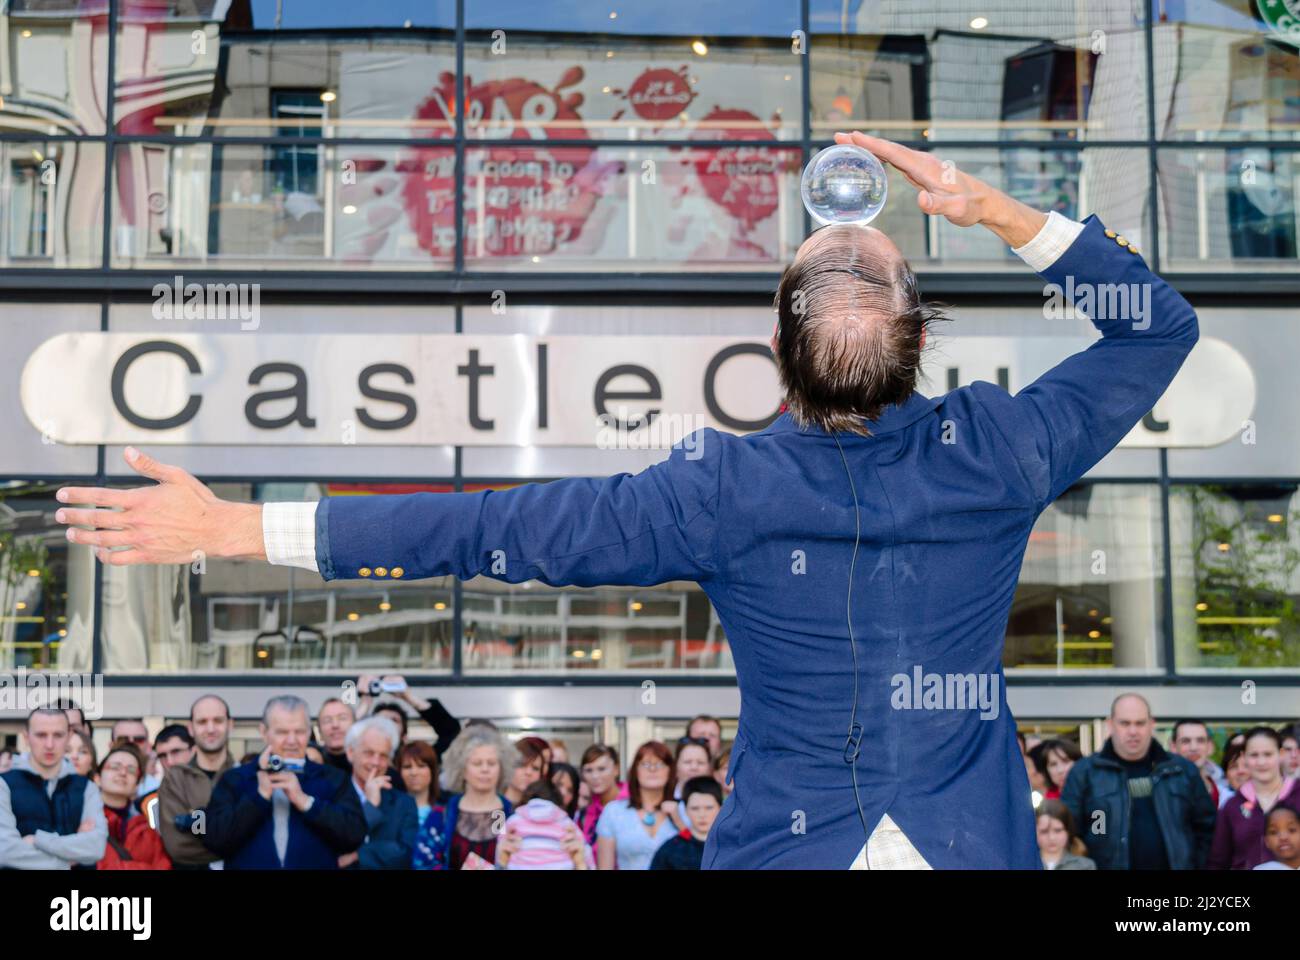 Belfast, Northern Ireland. 3rd May 2008.  A Street performer balances a crystal ball on his forehead as he performs to an audience outside Castle Court Shopping Centre. Stock Photo